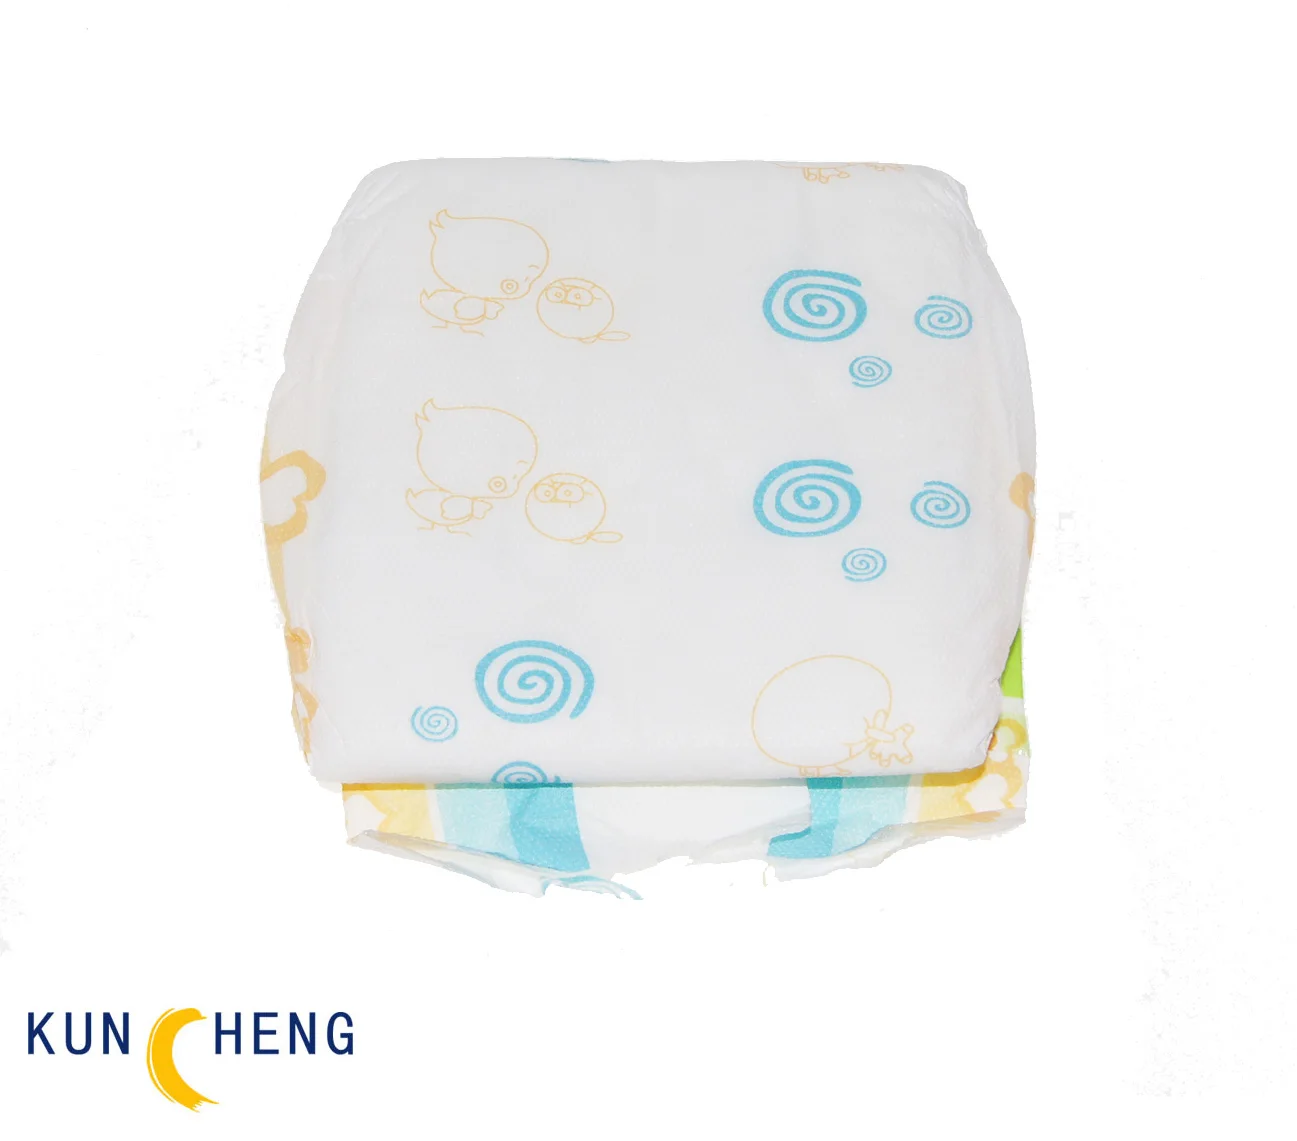 
baby diapers super thin soft touch adult diaper non woven breathable disposable high absorbability no leakage size m 25g/5g 